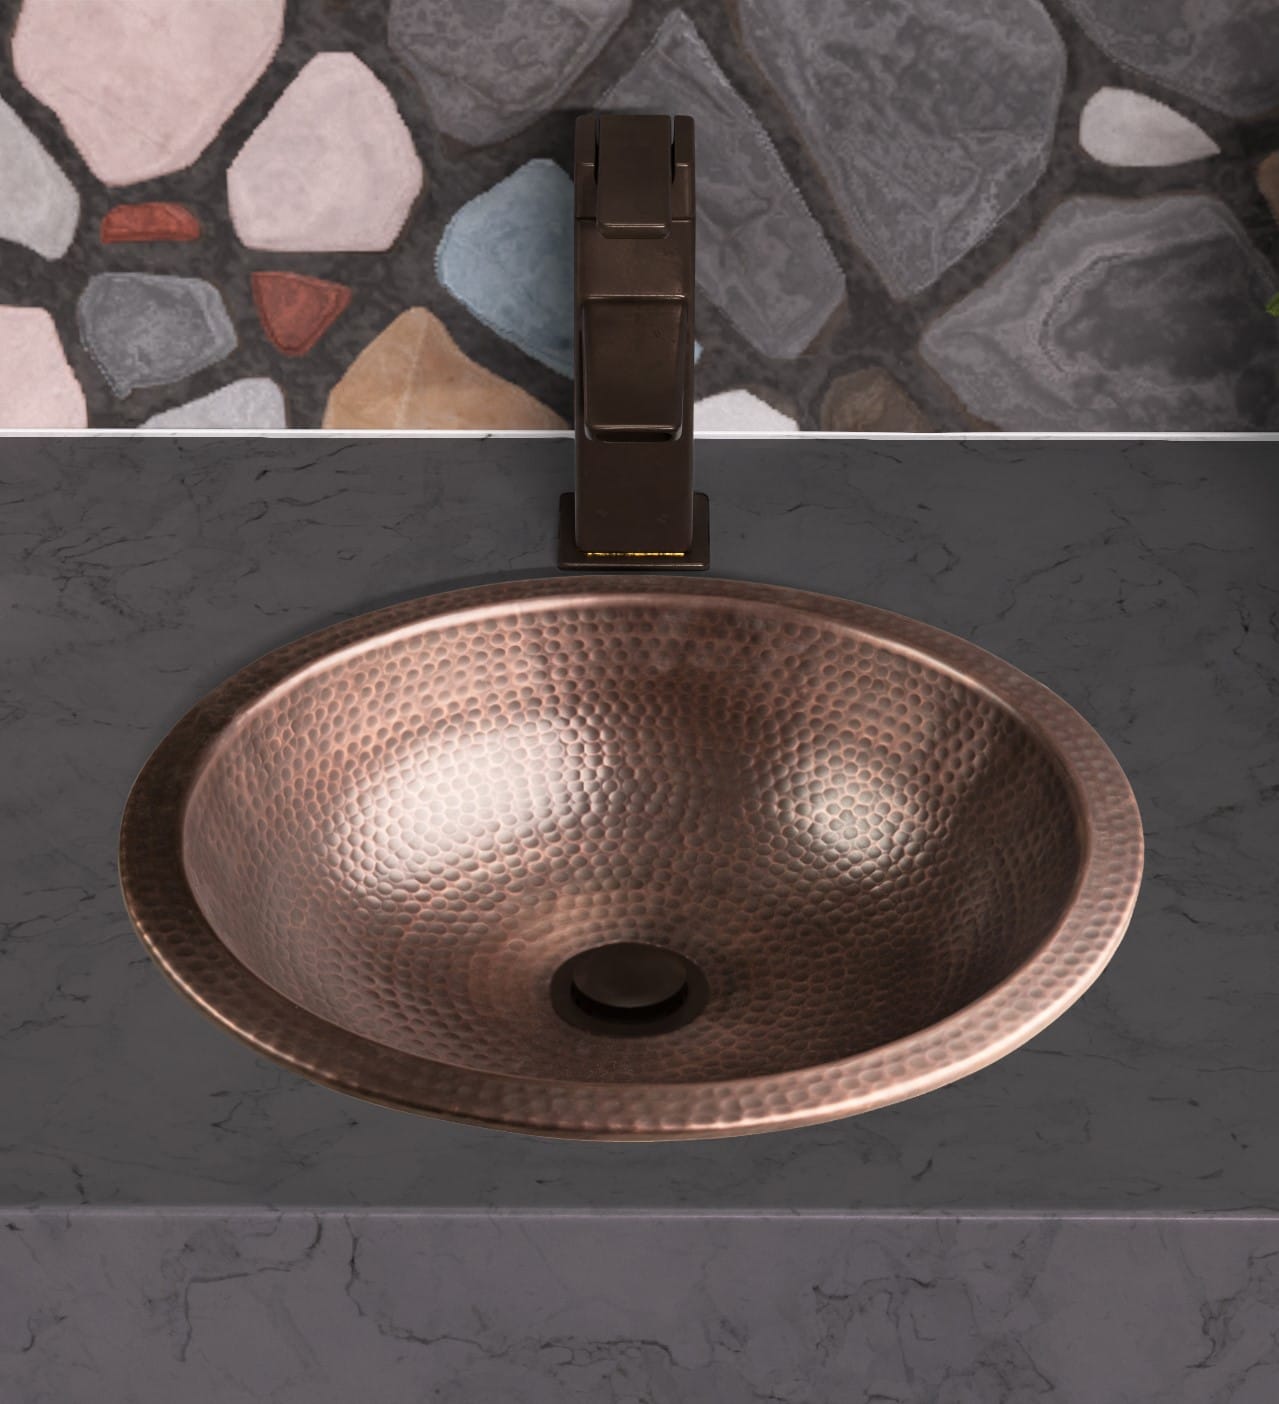 16x13 Oval Copper Bathroom Sink Mexican Hand Hammered Dual Mount Dark CPS01